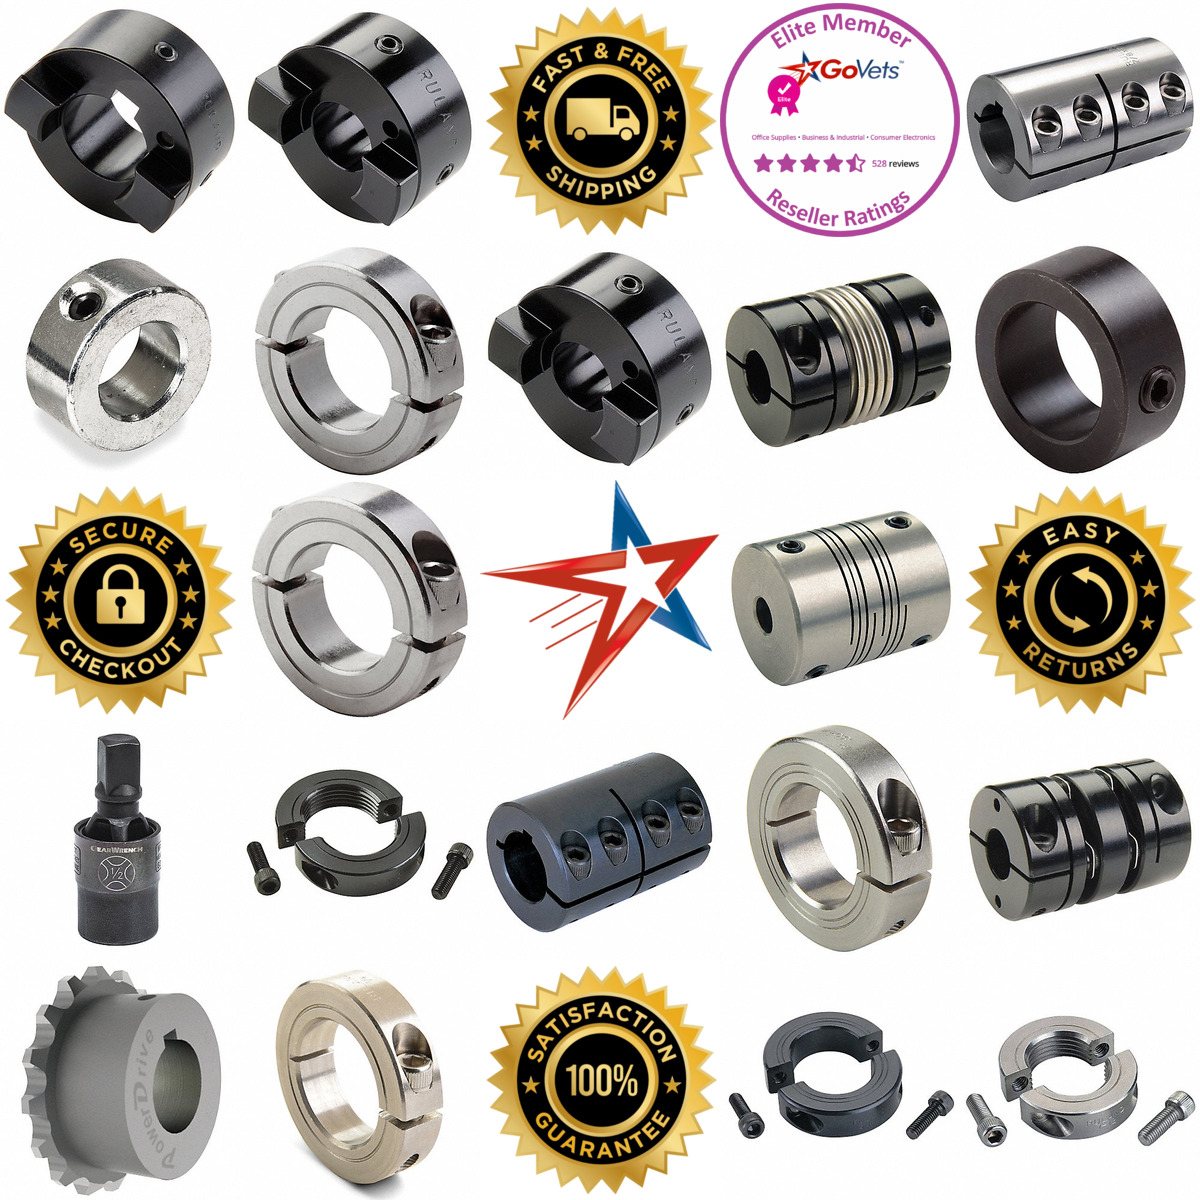 A selection of Shaft Couplings Collars and Universal Joints products on GoVets